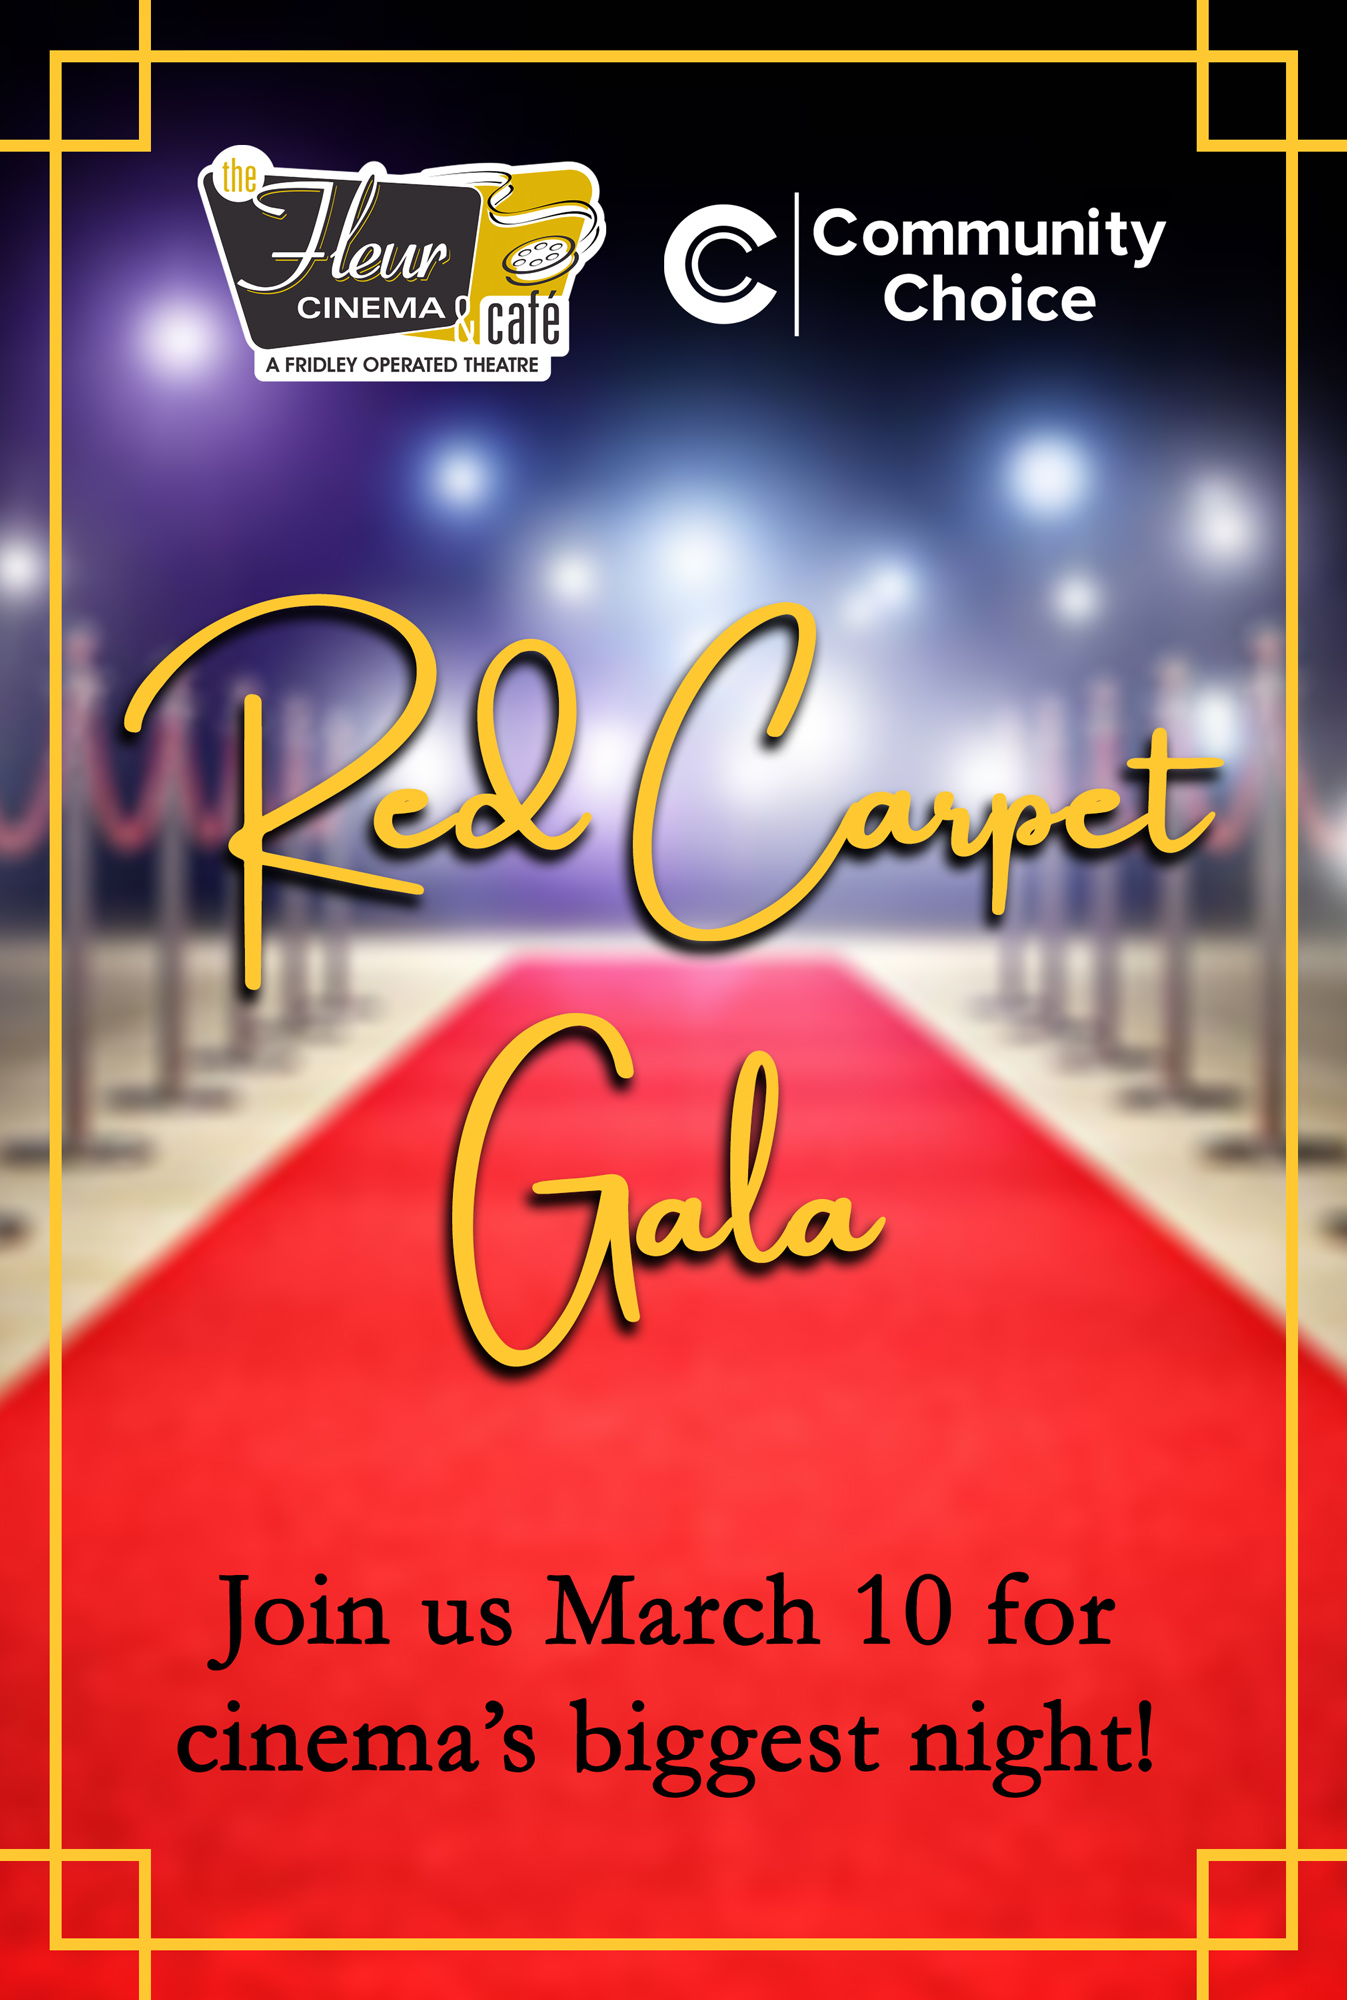 Red Carpet Gala in text in front of a red carpet. Poster reads, "Join us March 10 for cinema's biggest night!"